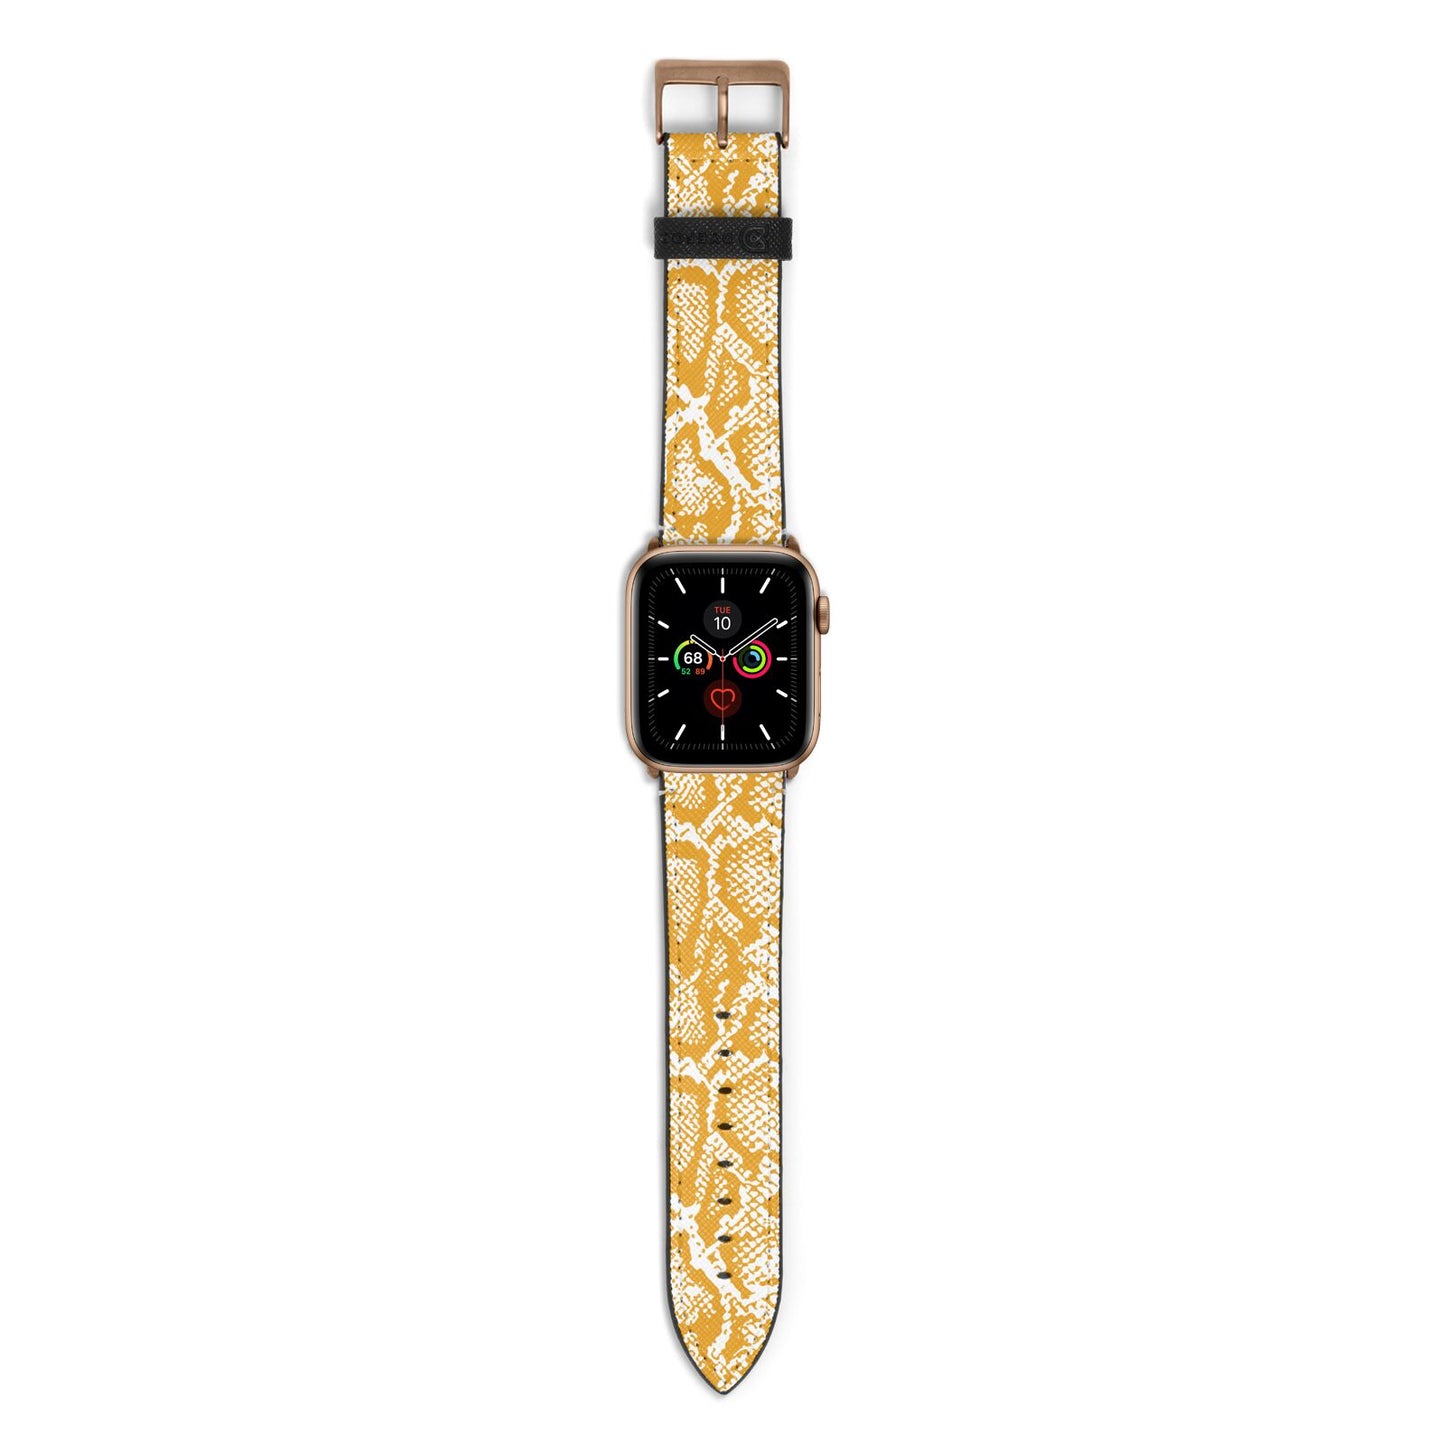 Yellow Snakeskin Apple Watch Strap with Gold Hardware